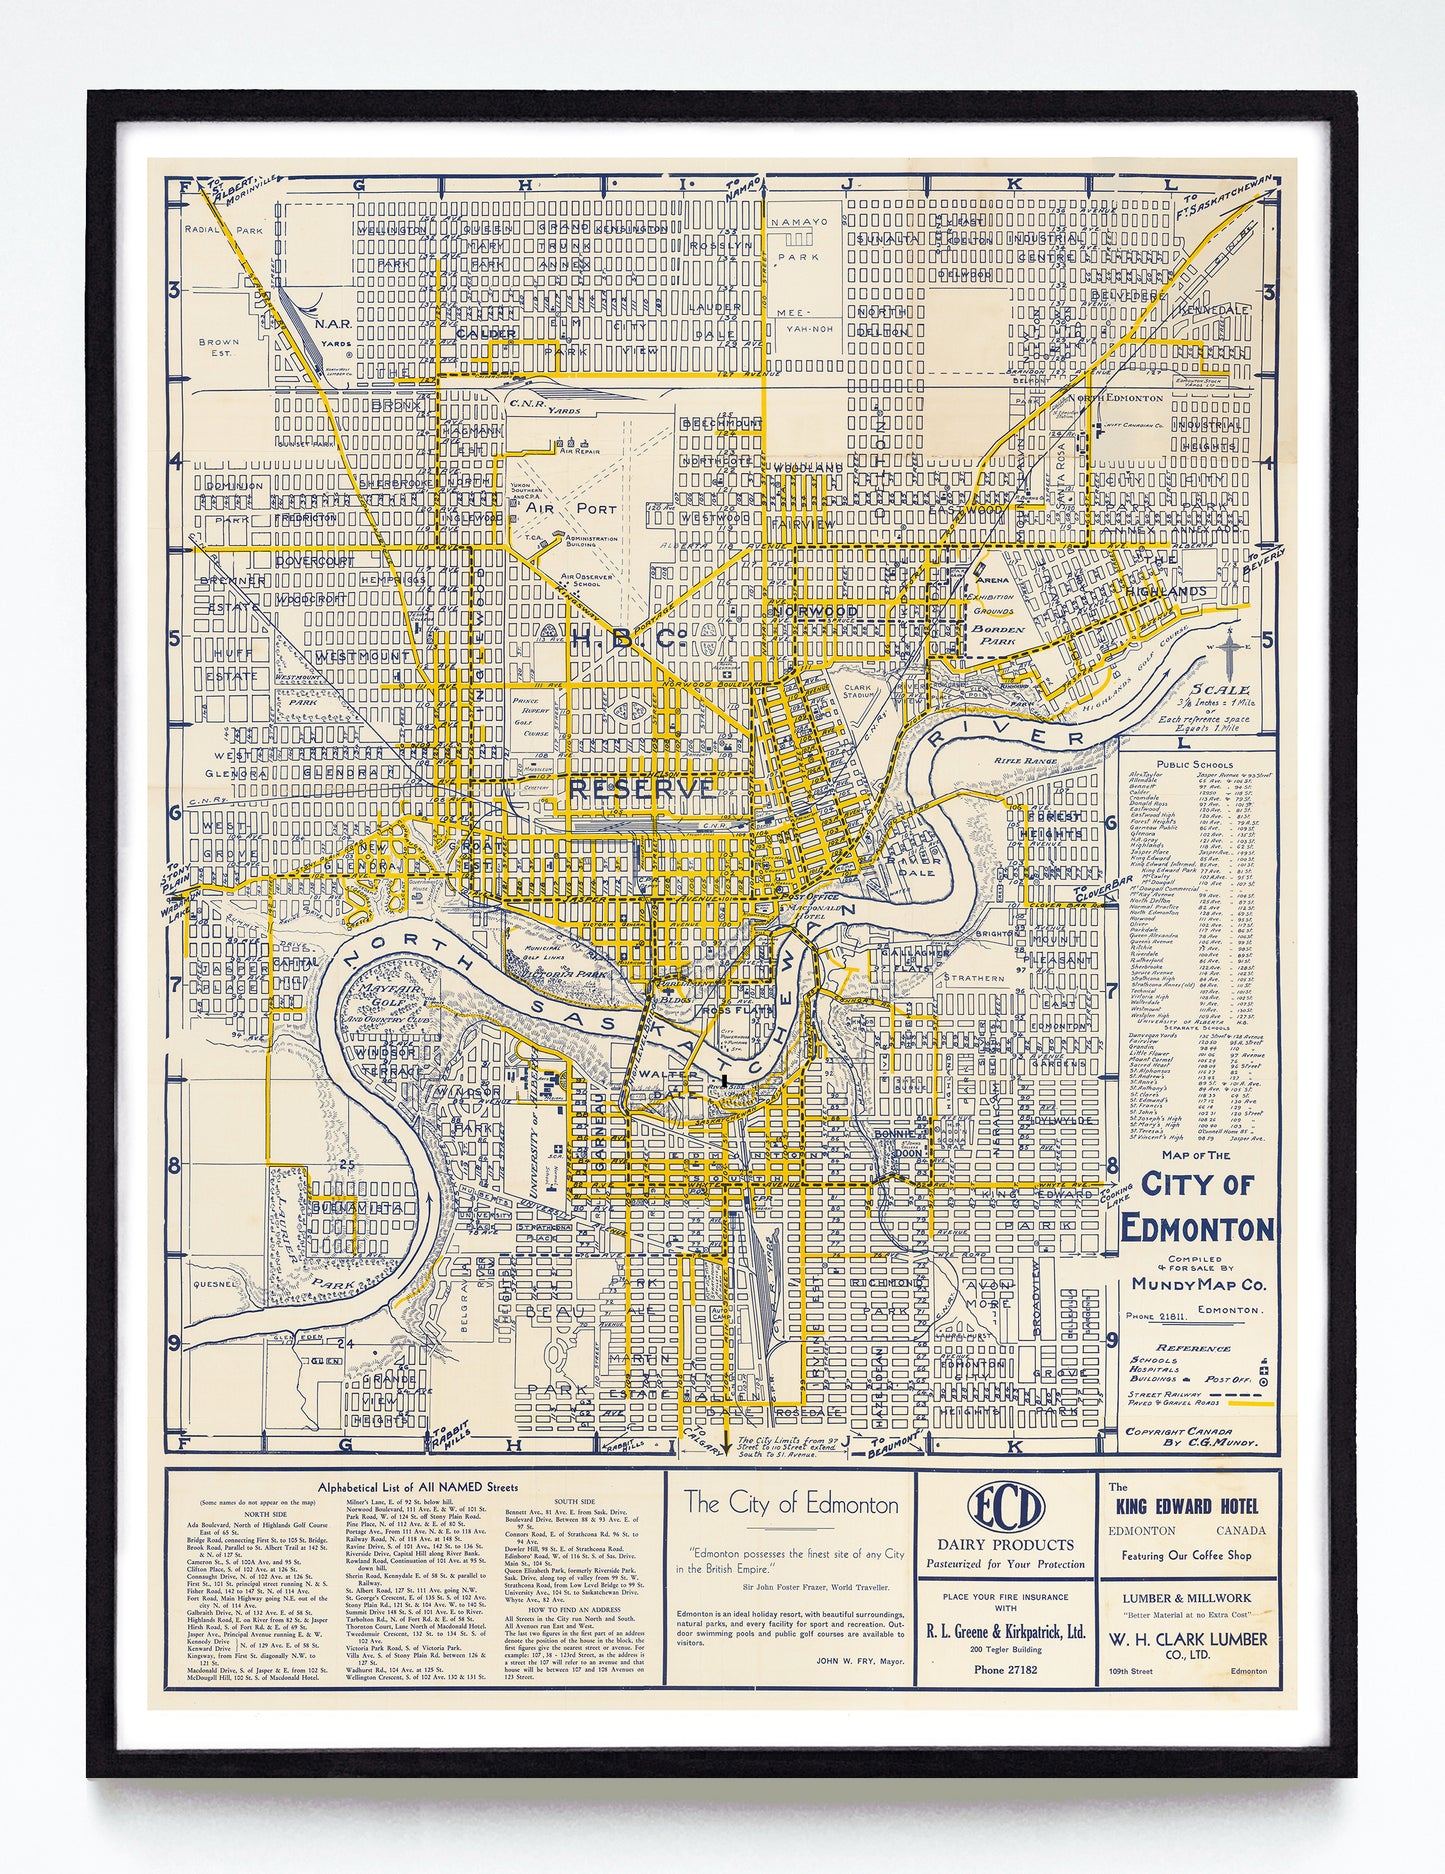 “Map of the City of Edmonton” print by C. G. Mundy. (1940)